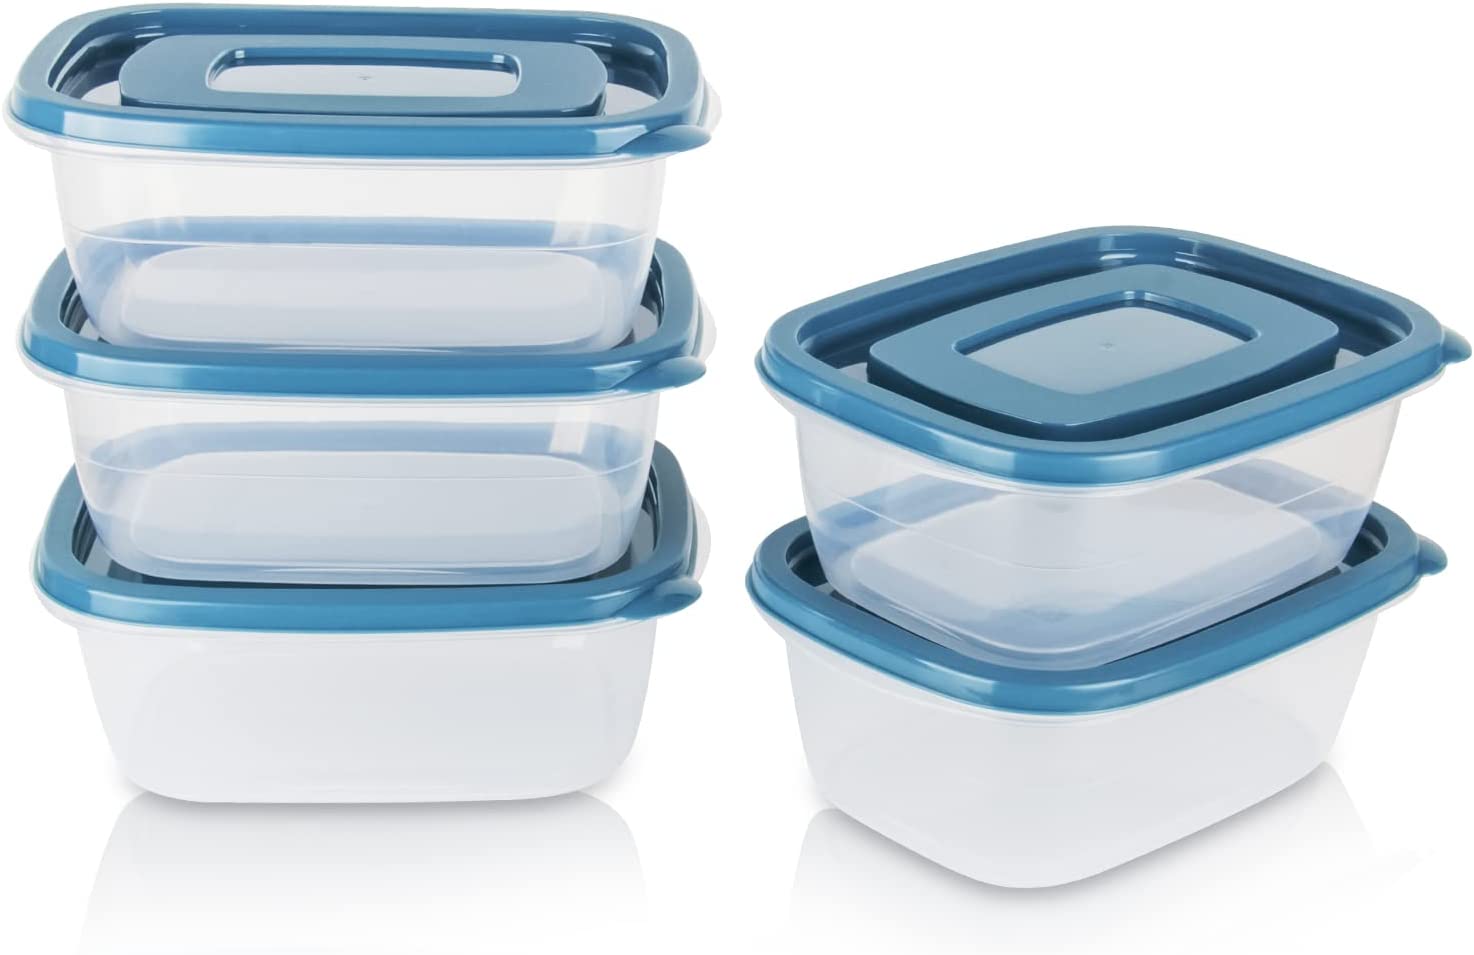 5PCS Rectangle Plastic Portion box Sets with Lids.Food Storage Box,Container Sets,Food Storage,Food Containers,Cereal Containers,use for refrigerator,School,Work and Travel,1.06 quarts(1000ML) per box